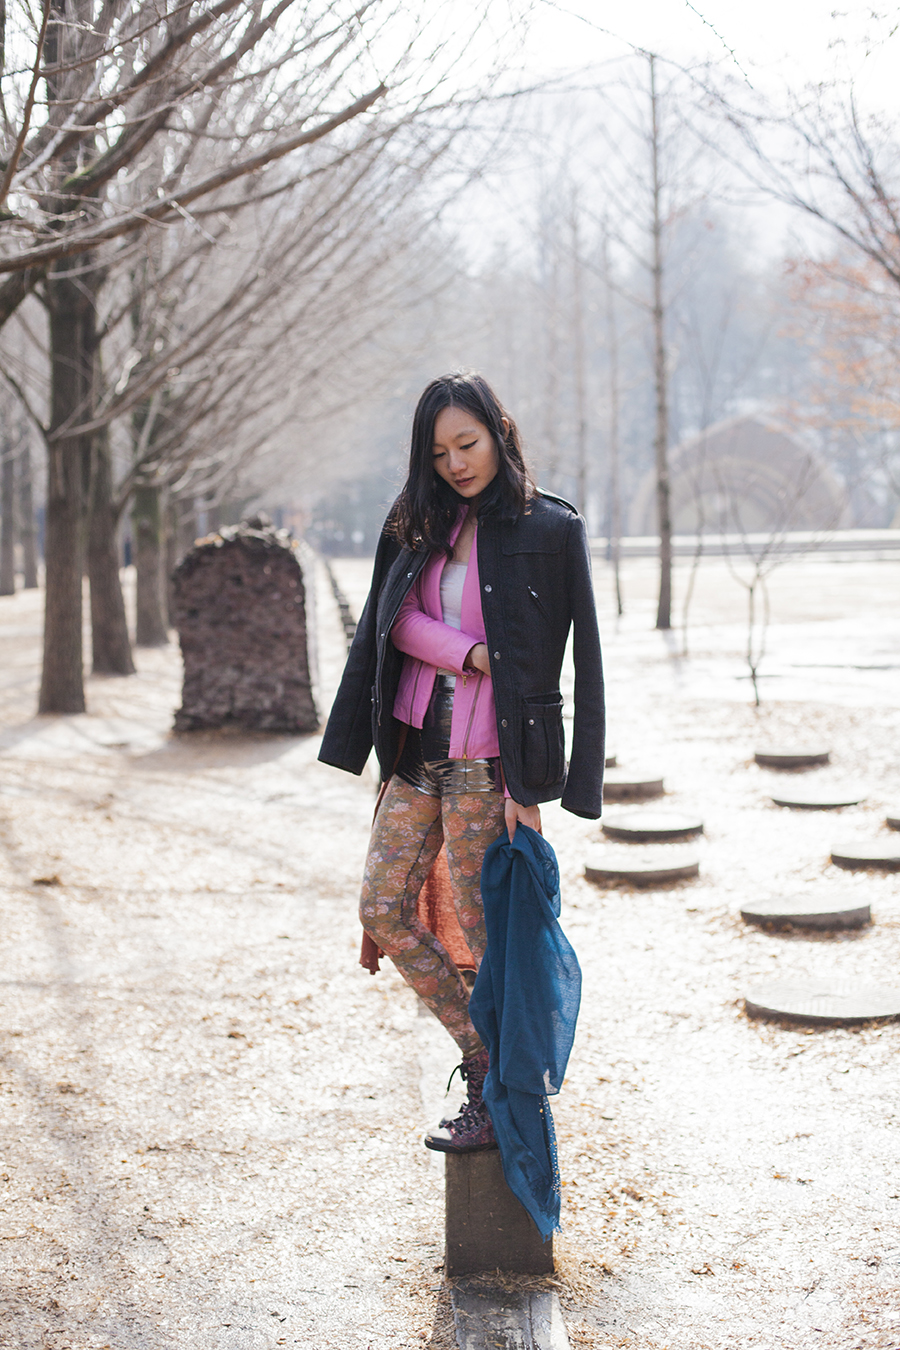 Outfit at Nami Island: Uniqlo grey bratop camisole, Viparo pink lambskin leather jacket with gold zipper, Forever 21 silver party shorts, Urban Outfitters floral lace tights, H&M grey men's coat, Marshalls blue shawl with gold studs.